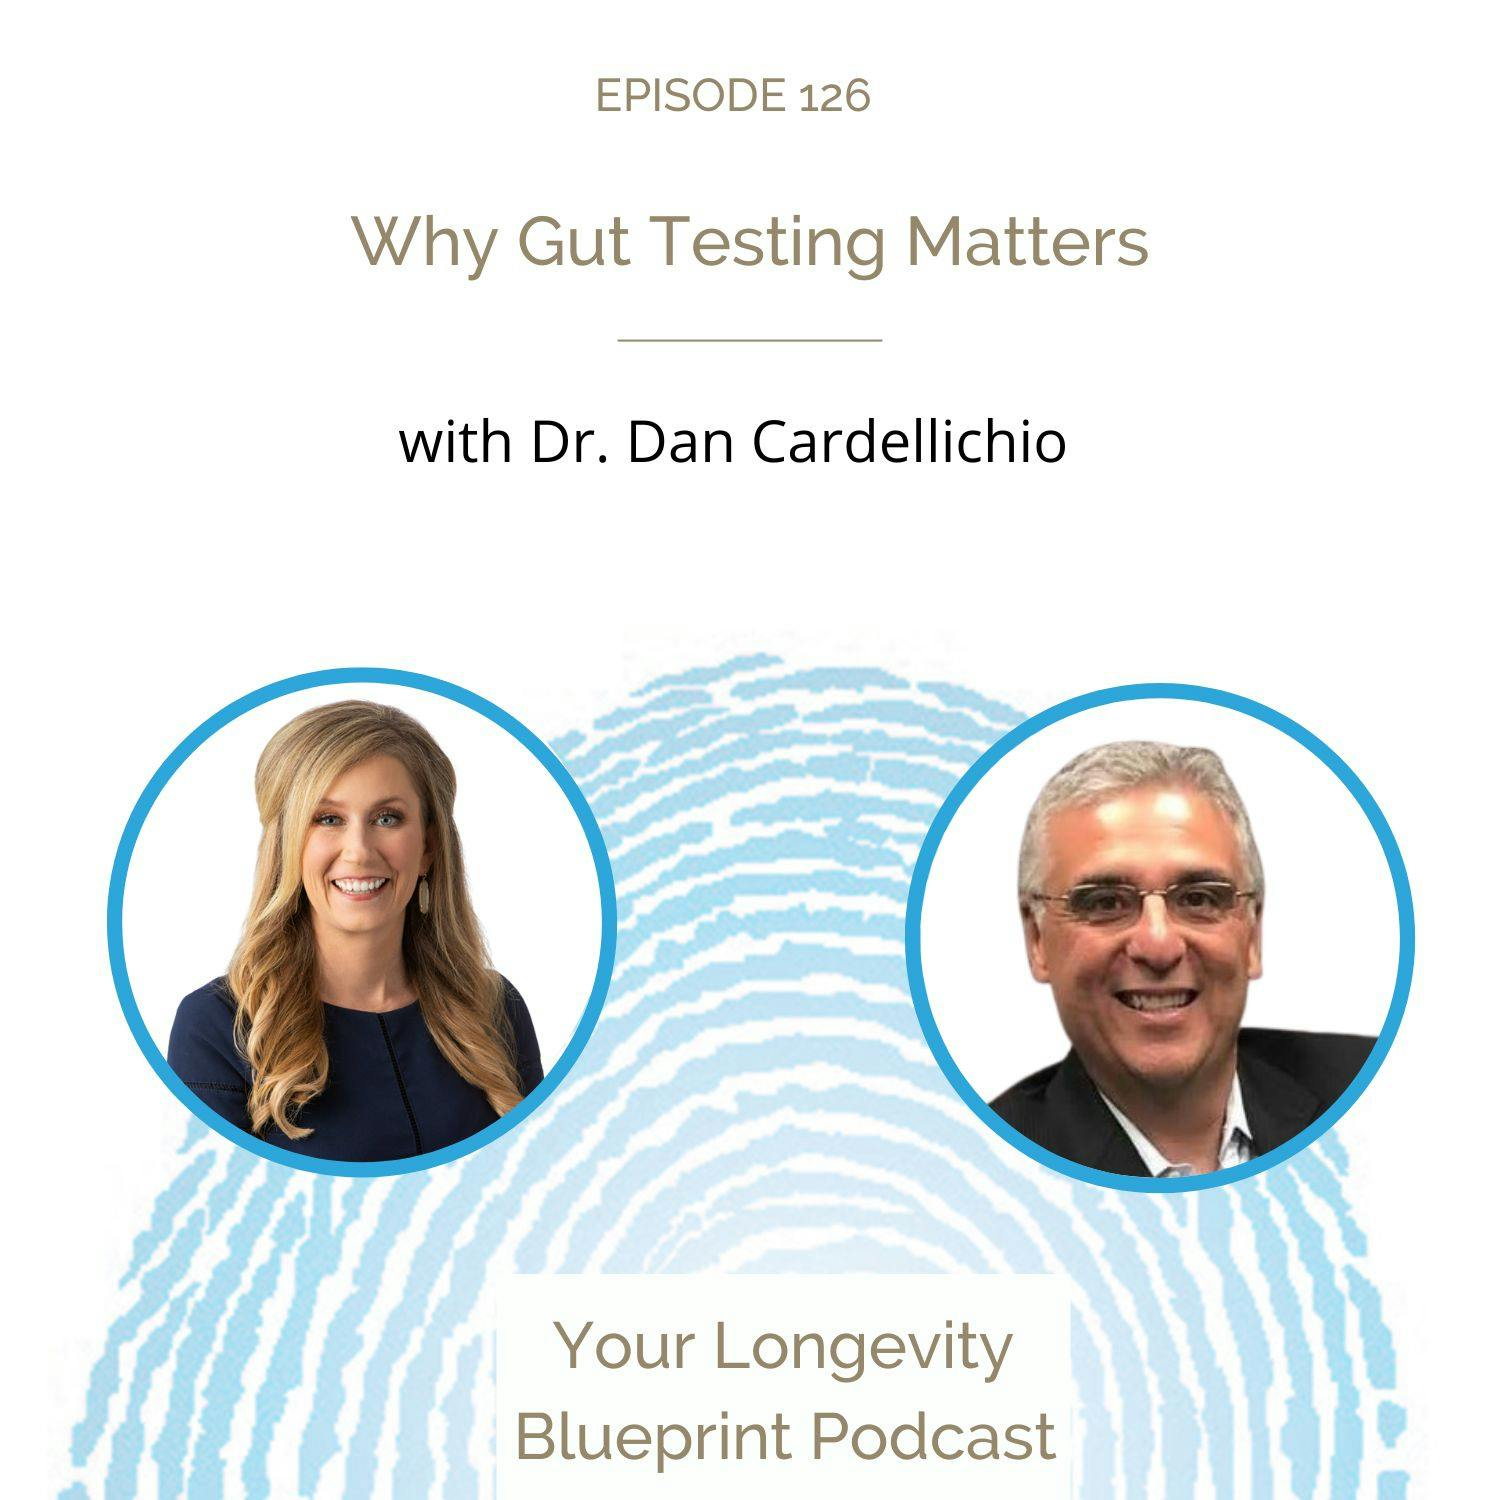 Why Gut Testing Matters with Dr. Dan Cardellichio